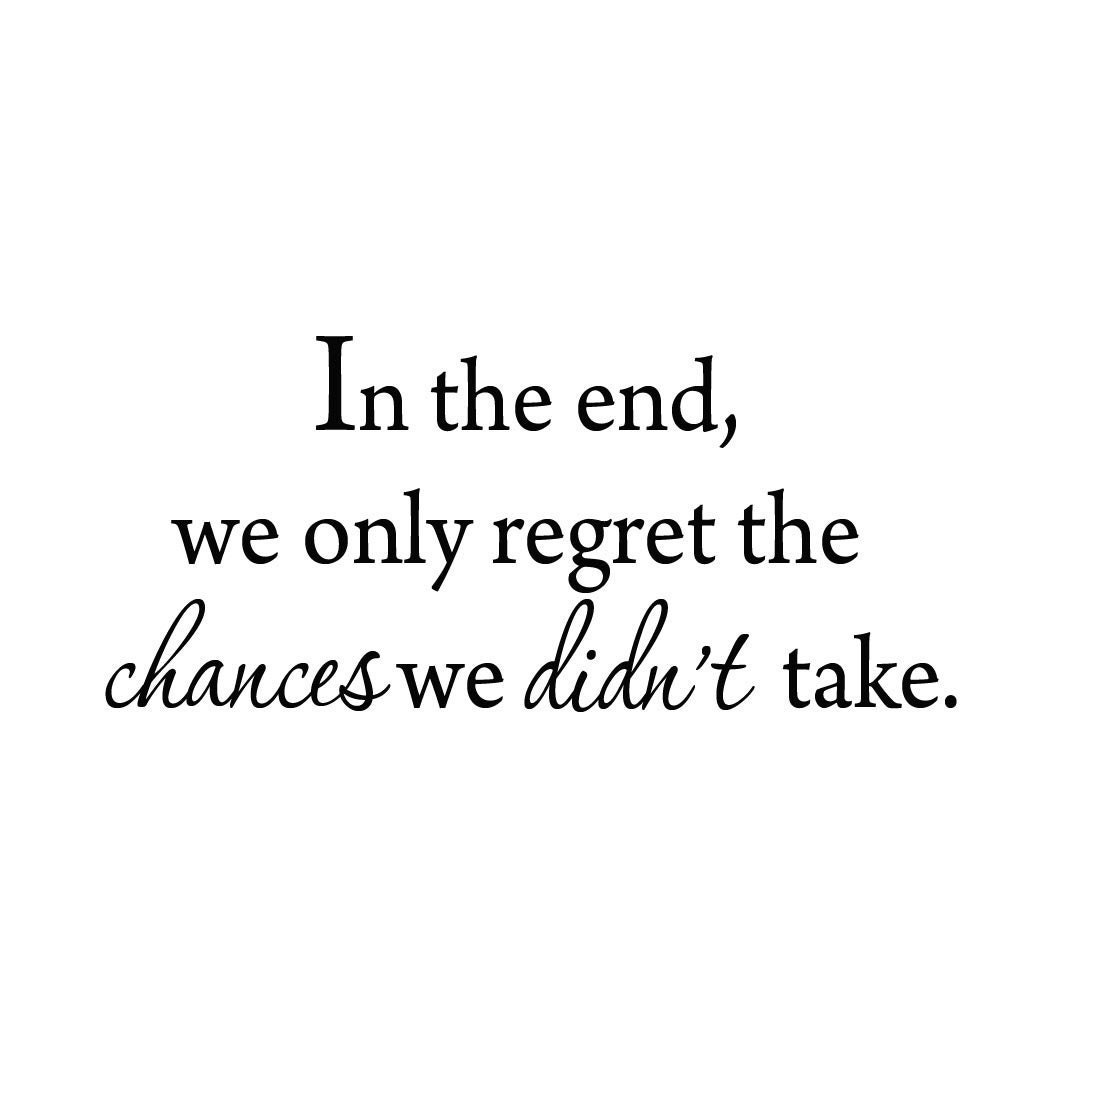 we only regret the chances we didnt take